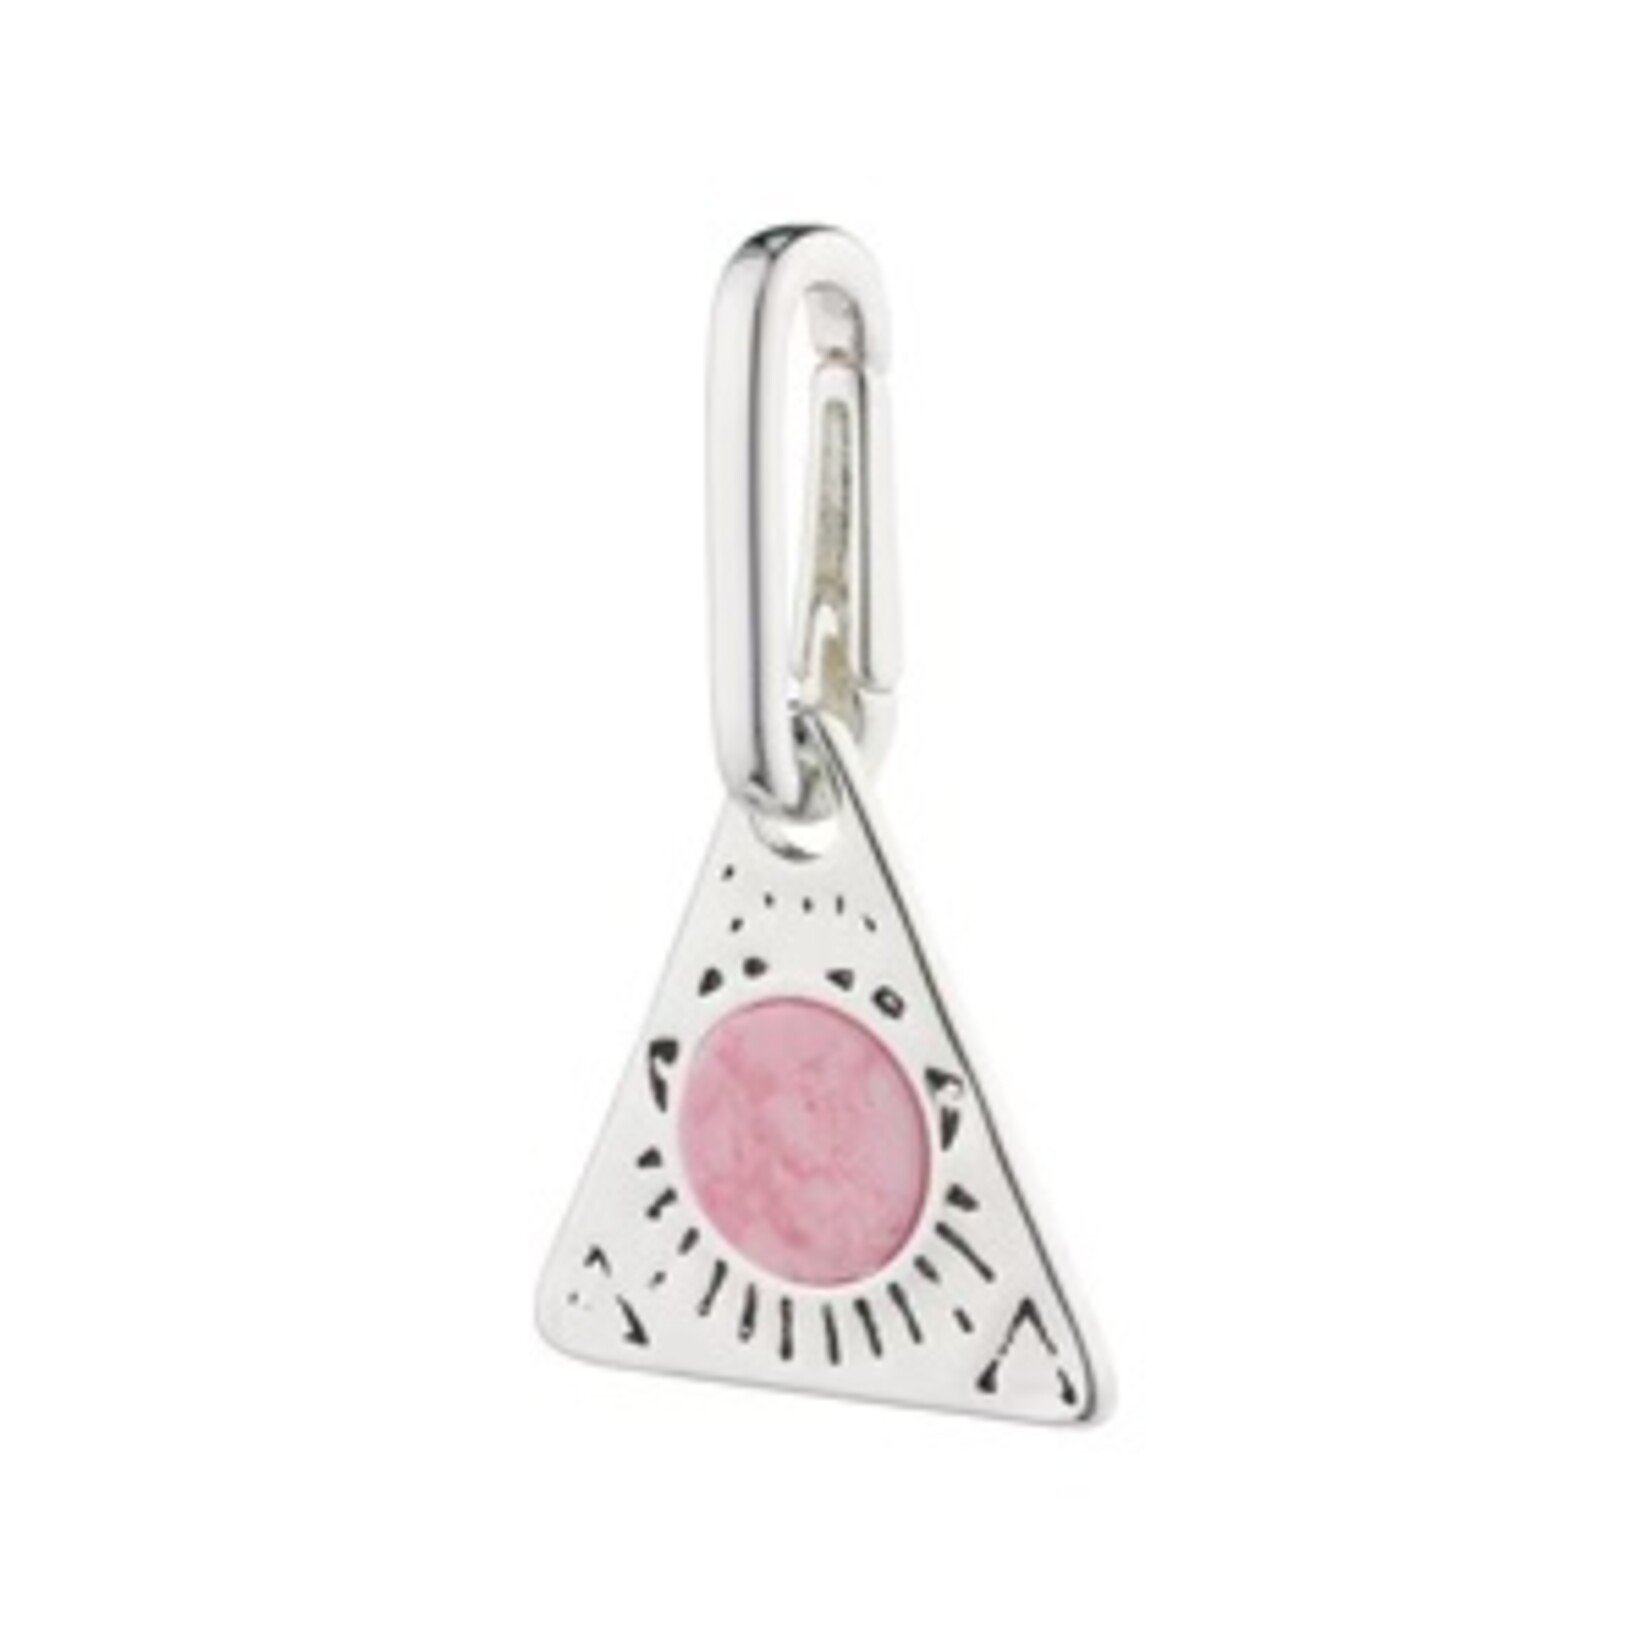 Pilgrim Charm, Recycled Triangle Pendant, Pink/Sliver-Plated